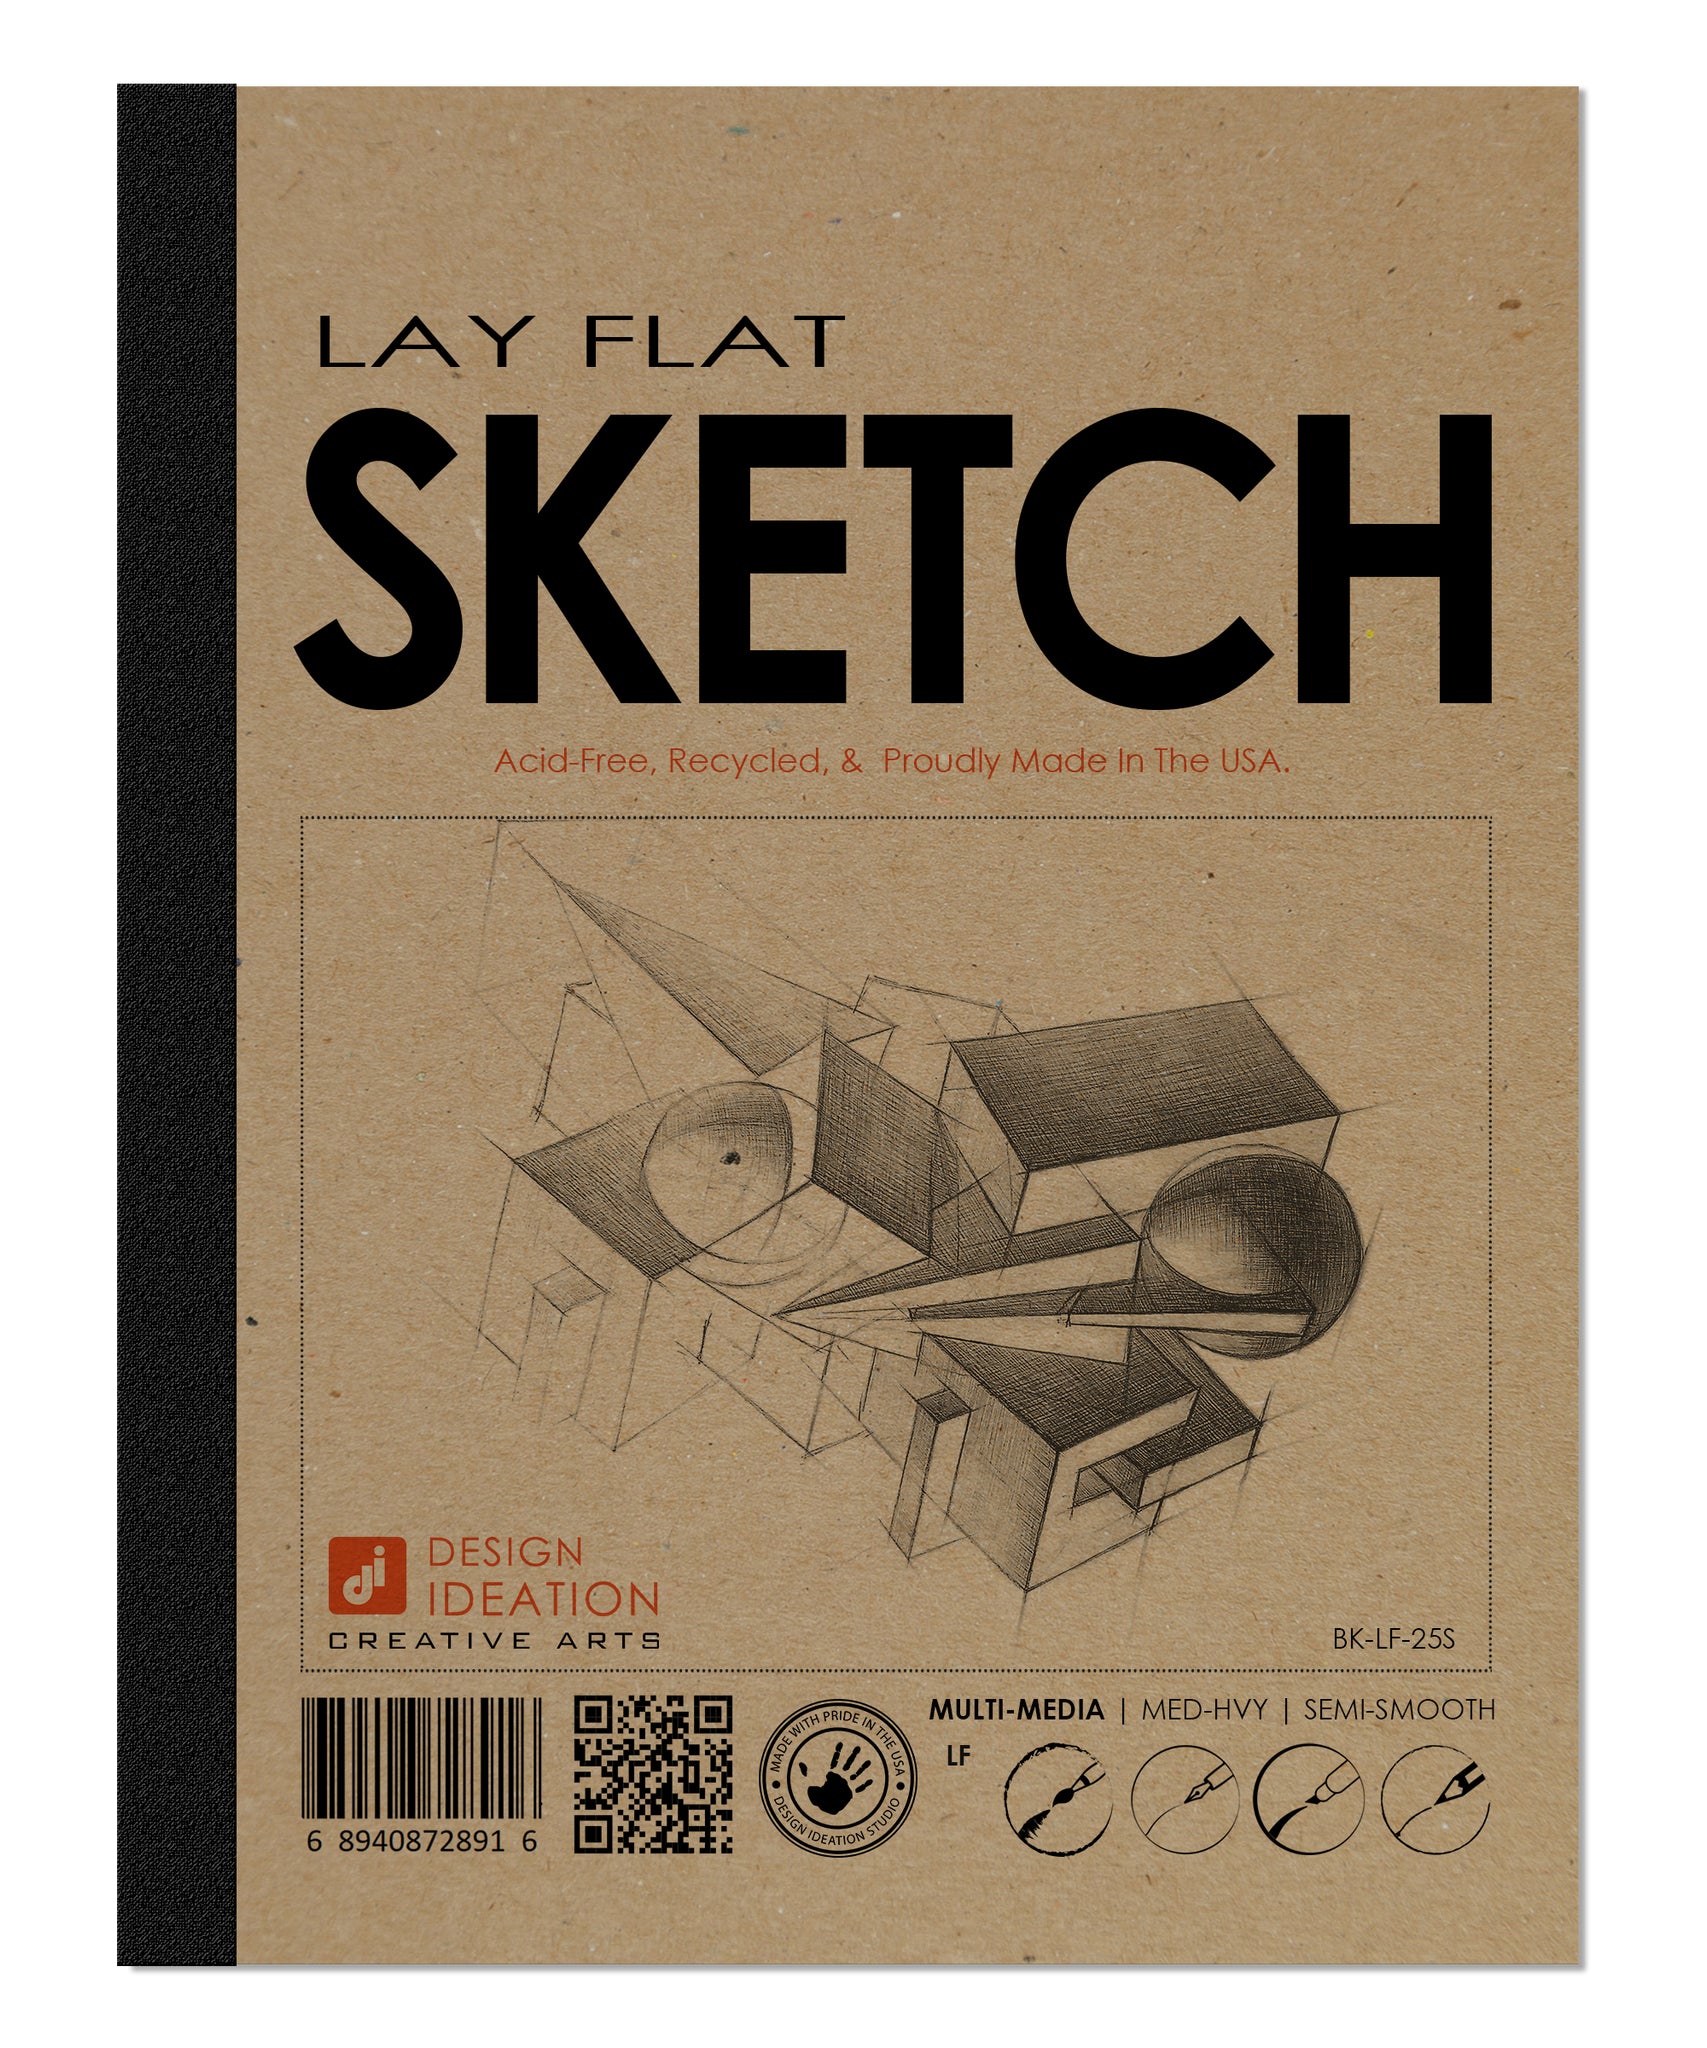 LAY FLAT sketchbook. Removable sheet, journal style WATERCOLOR